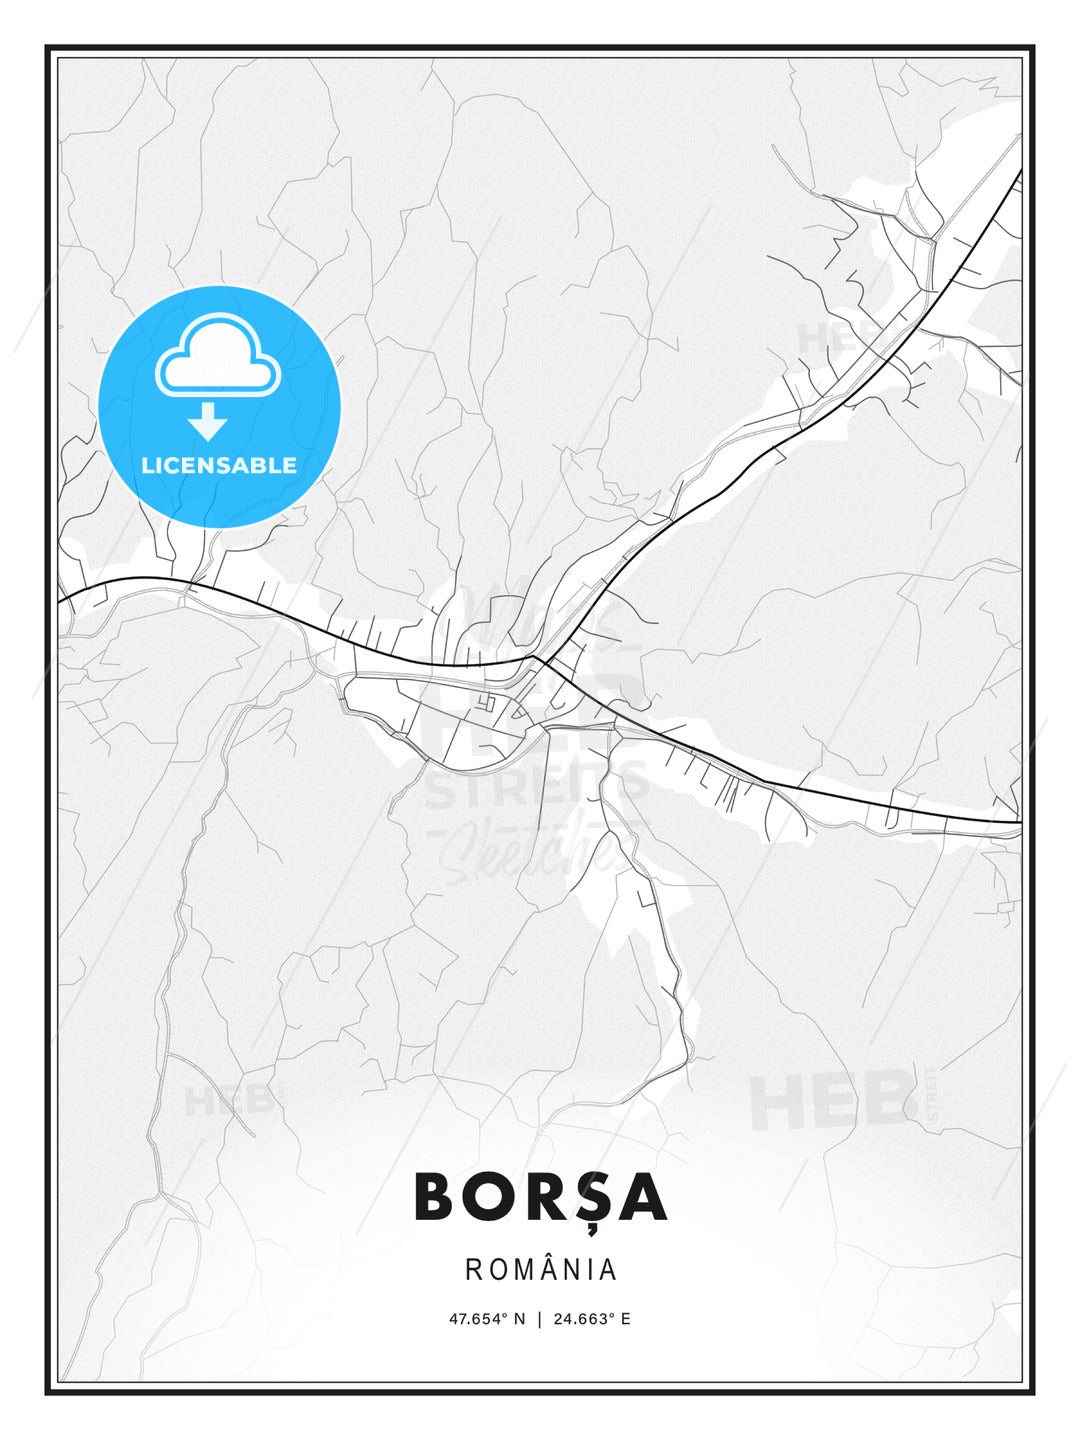 Borșa, Romania, Modern Print Template in Various Formats - HEBSTREITS Sketches